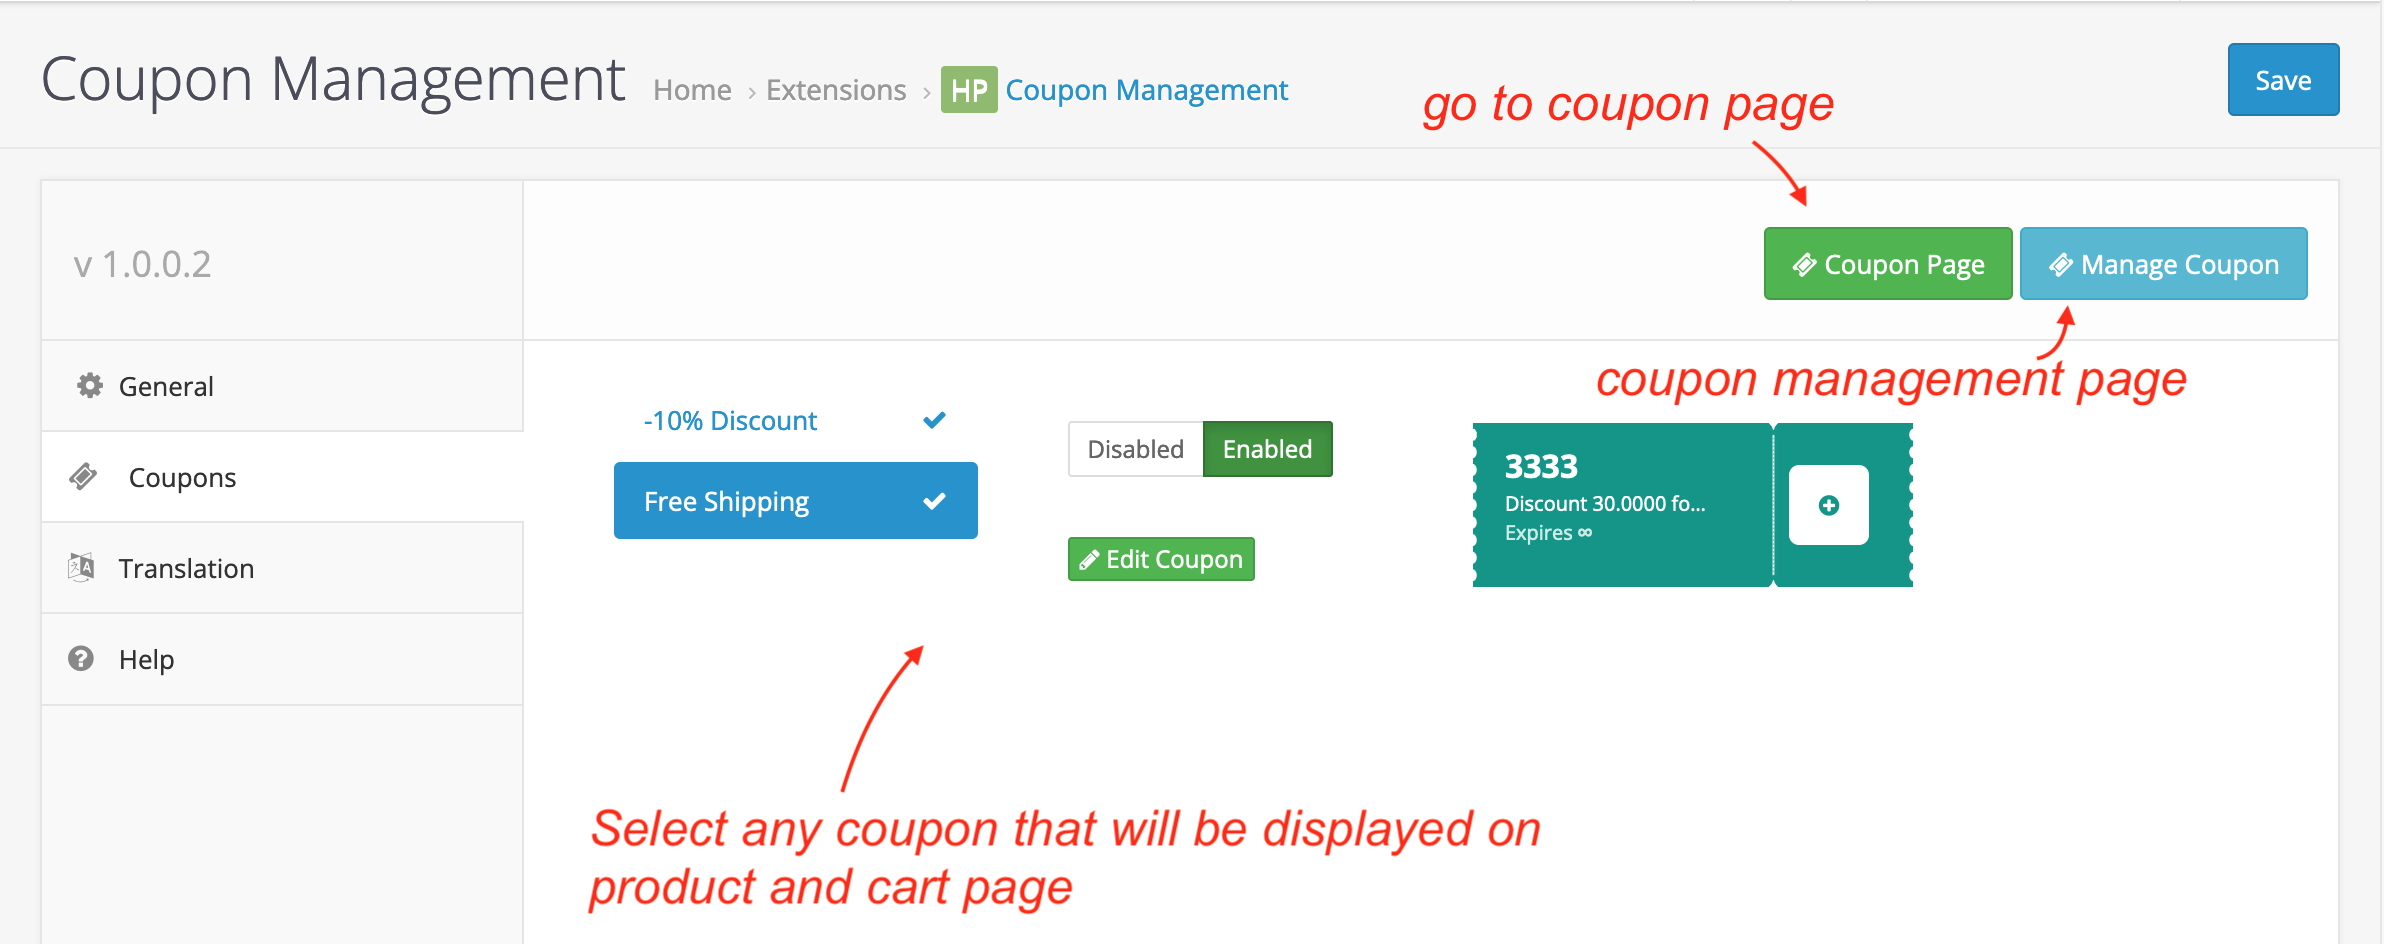 select coupons that will be disaplyed on product page and cart page